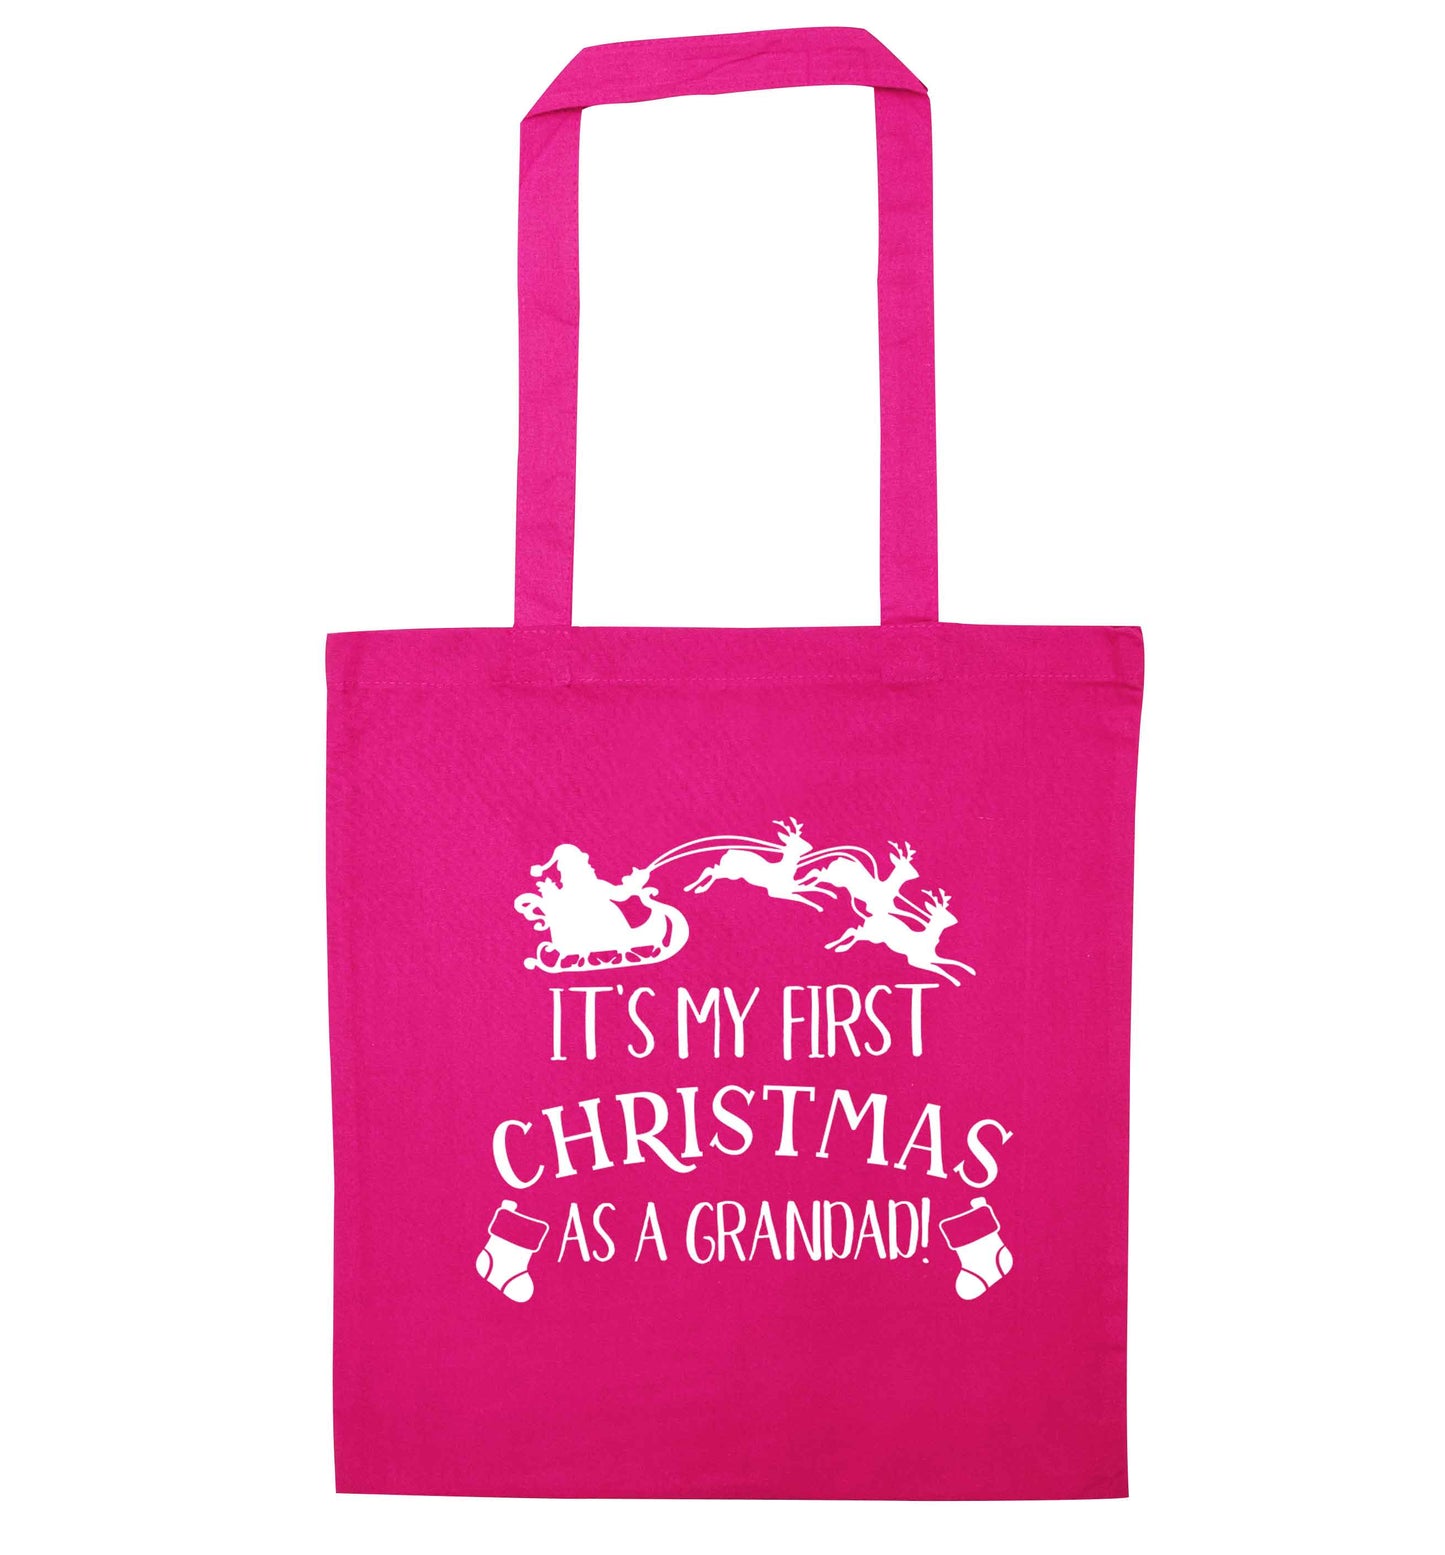 It's my first Christmas as a grandad! pink tote bag